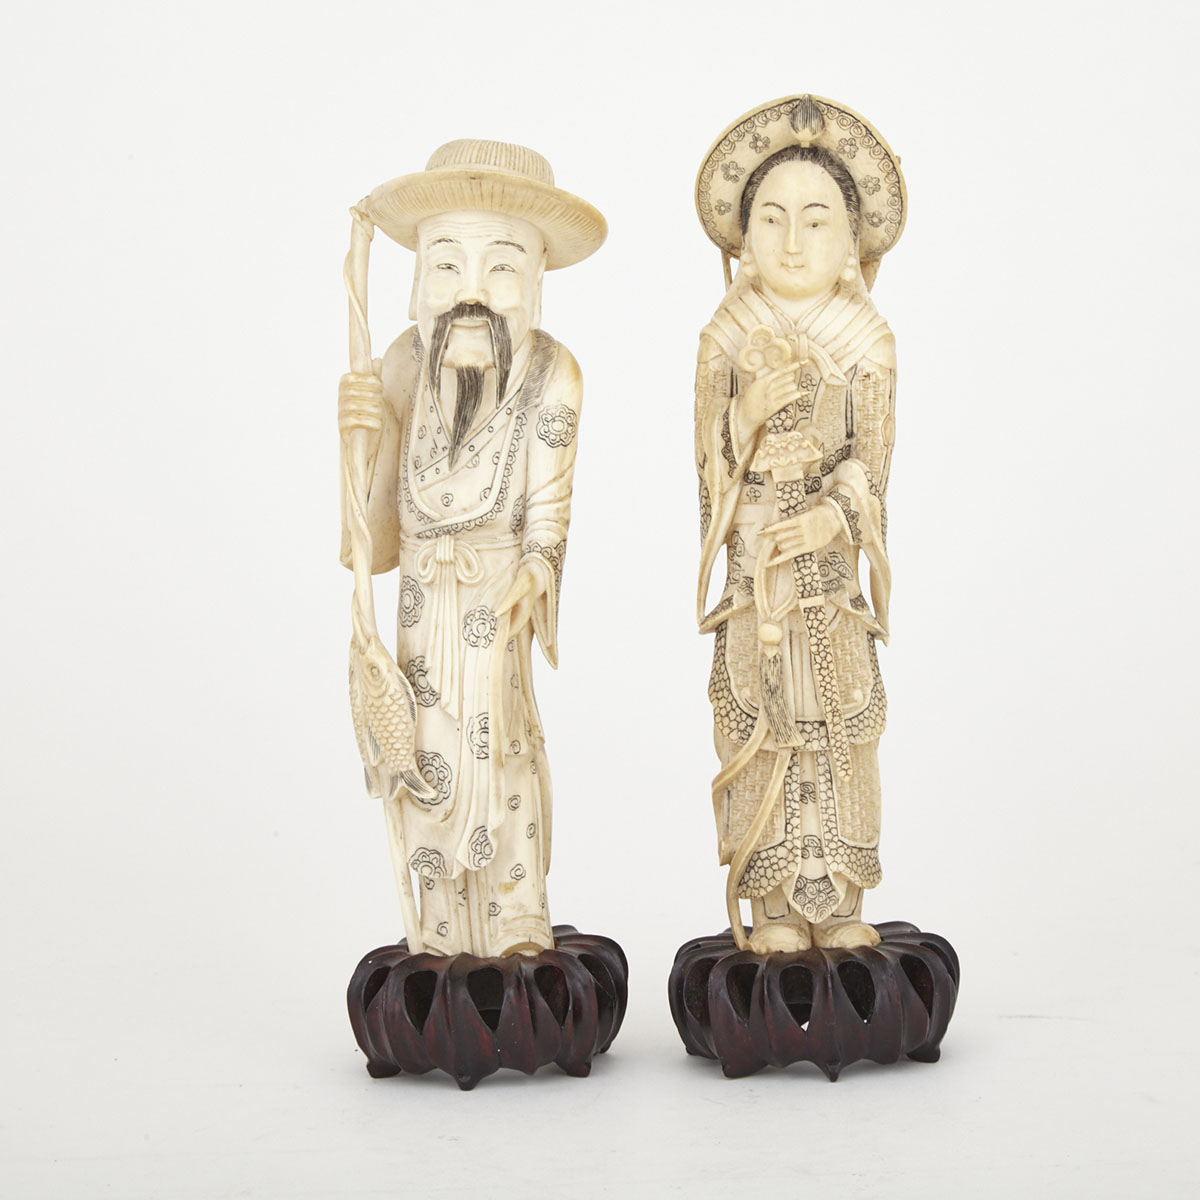 Pair of Japanese Carved Ivory Figures, Early 20th Century